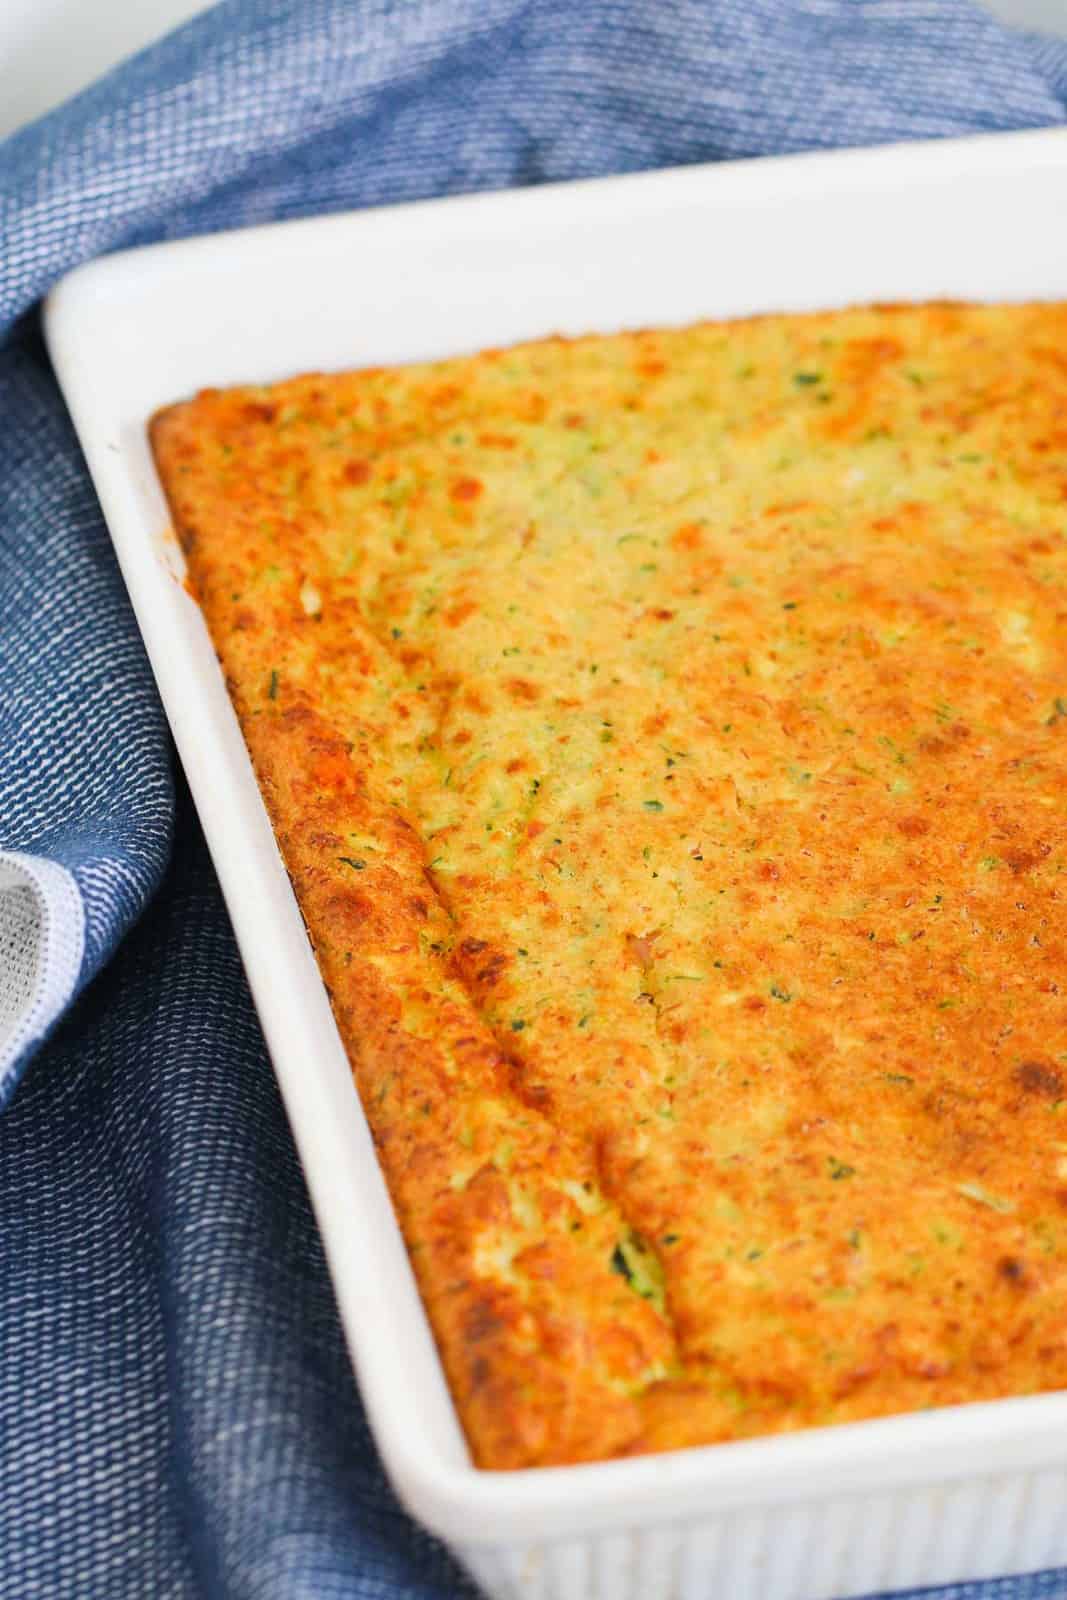 A whit baking dish filled with golden homemade zucchini slice.